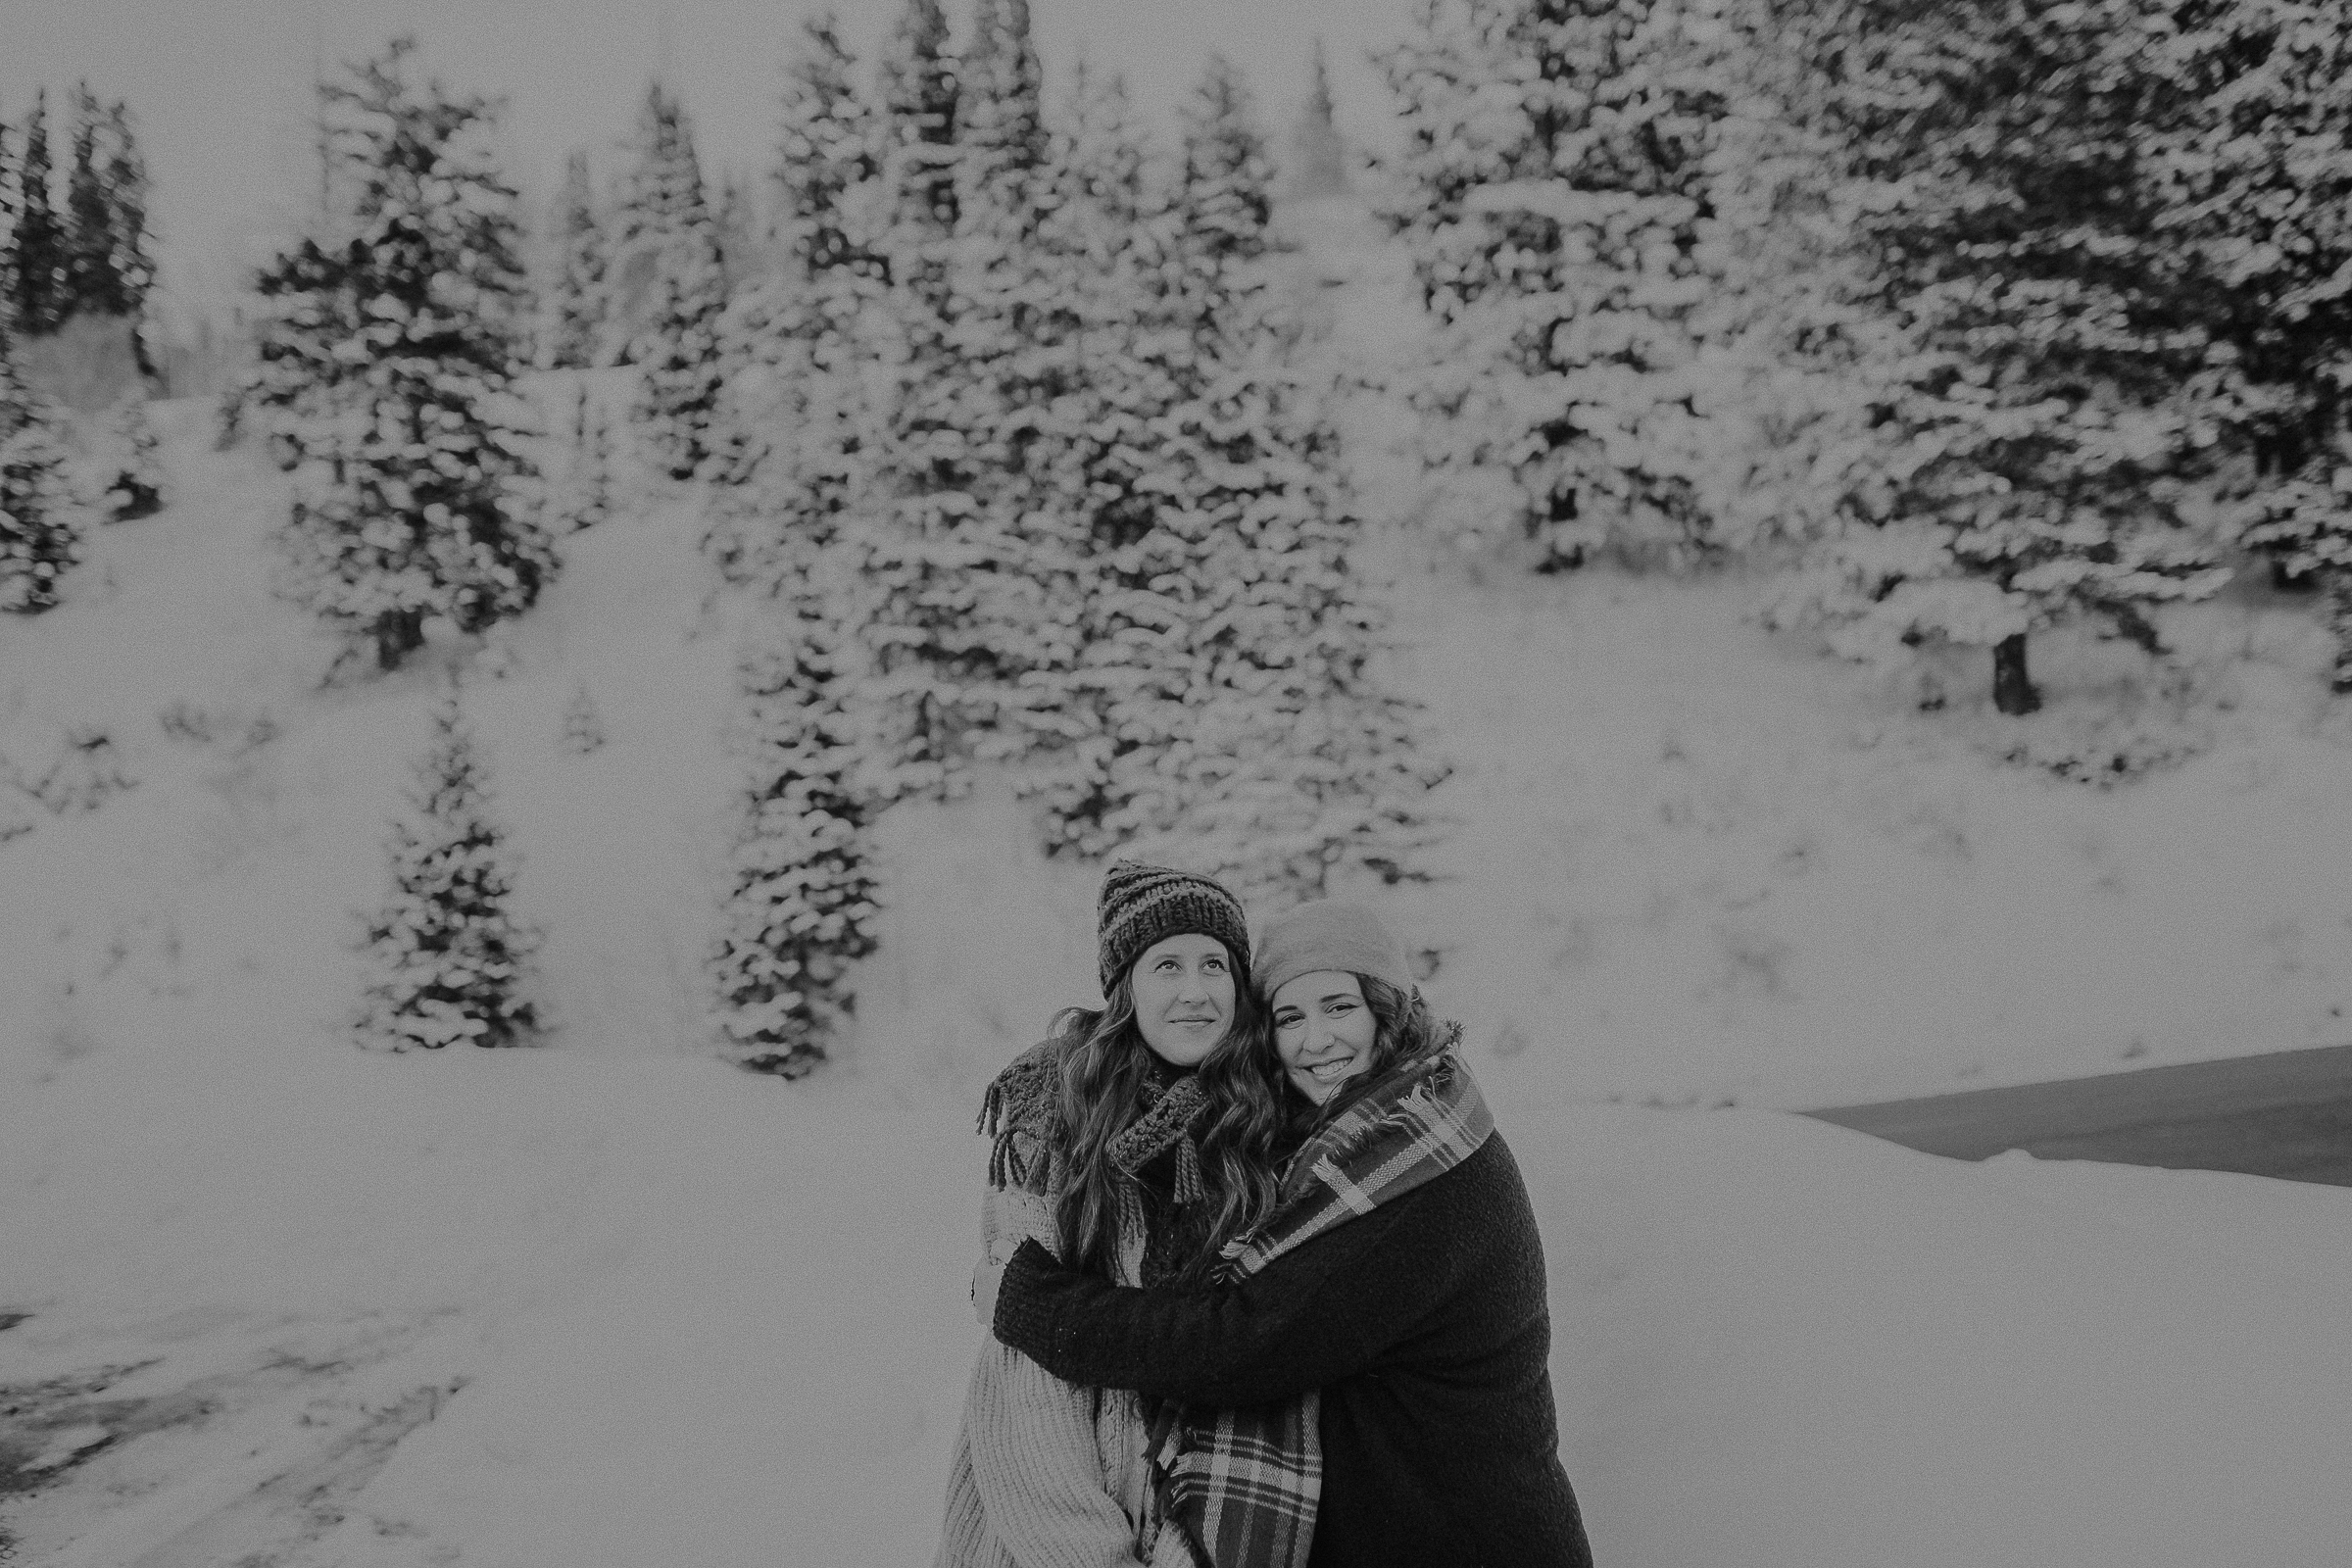 Sisters standing . together in snowy mountains 